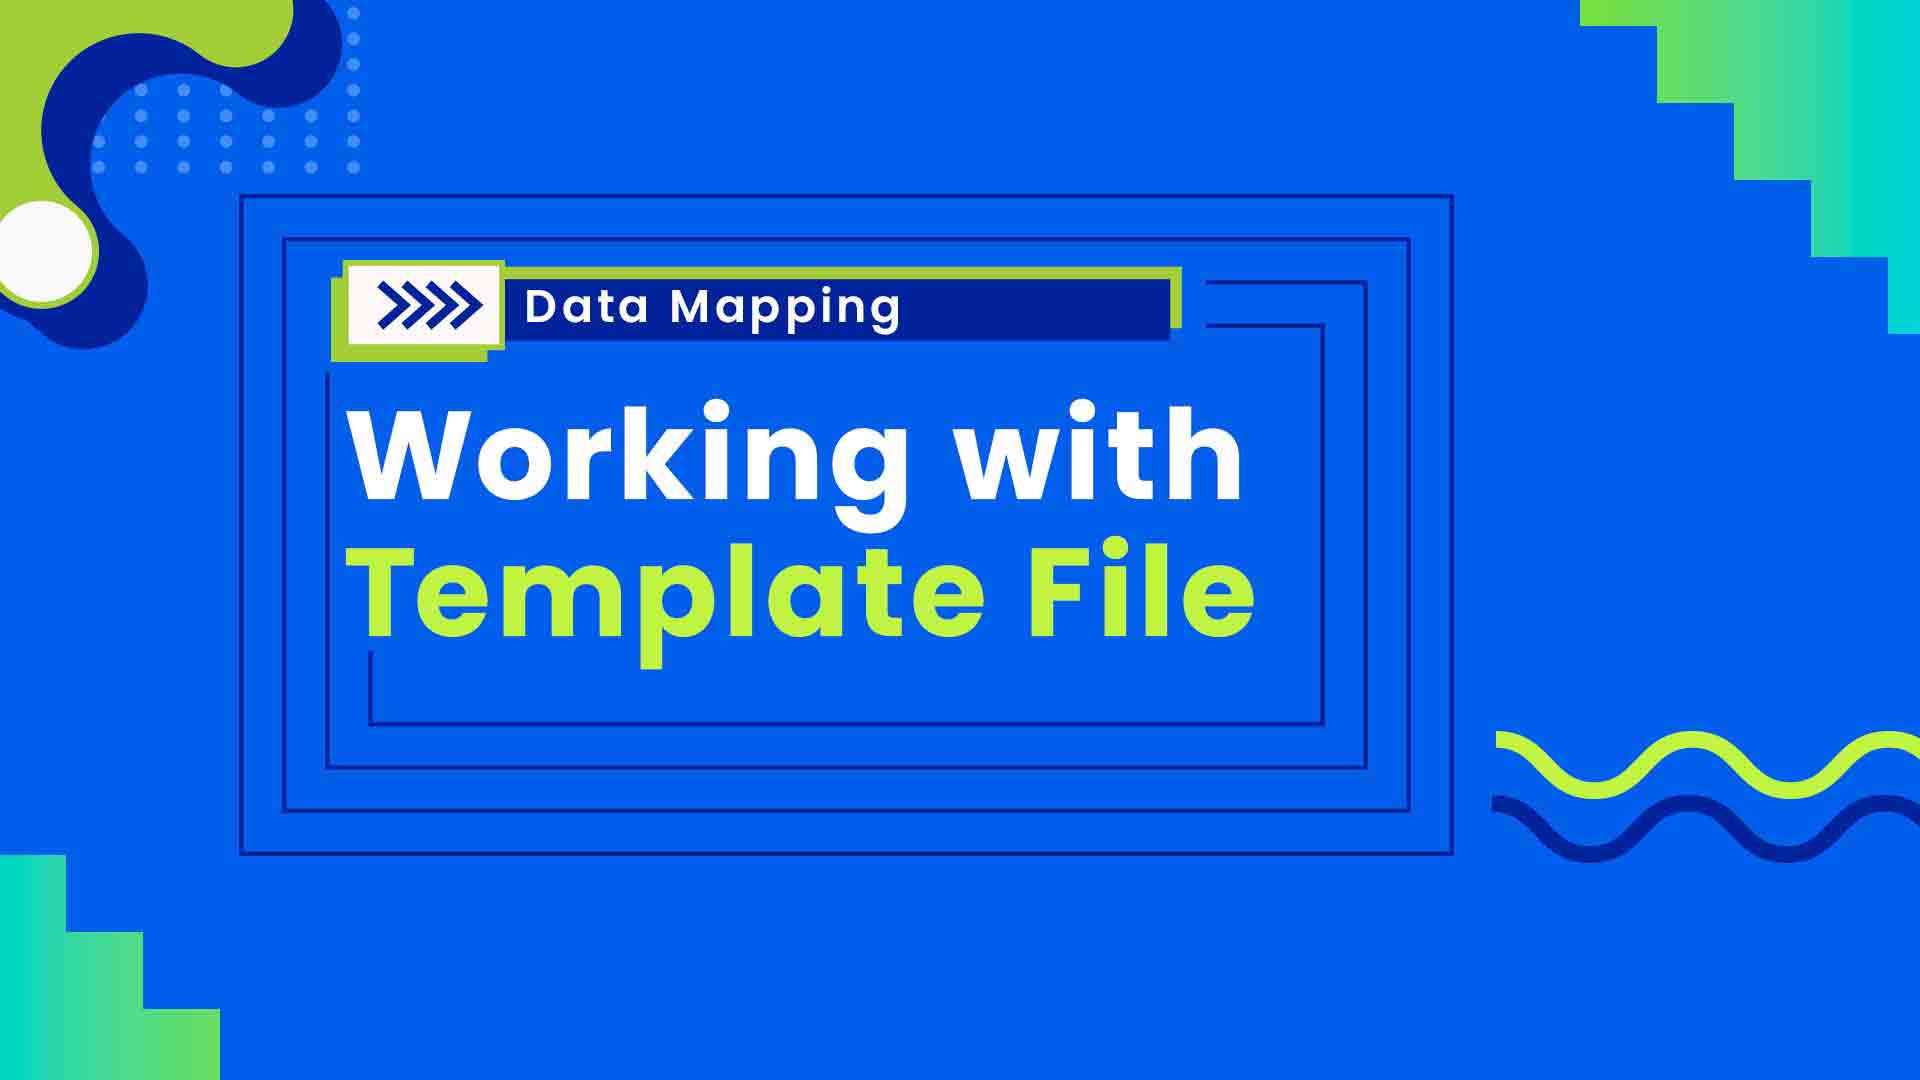 2. Working with Template File 